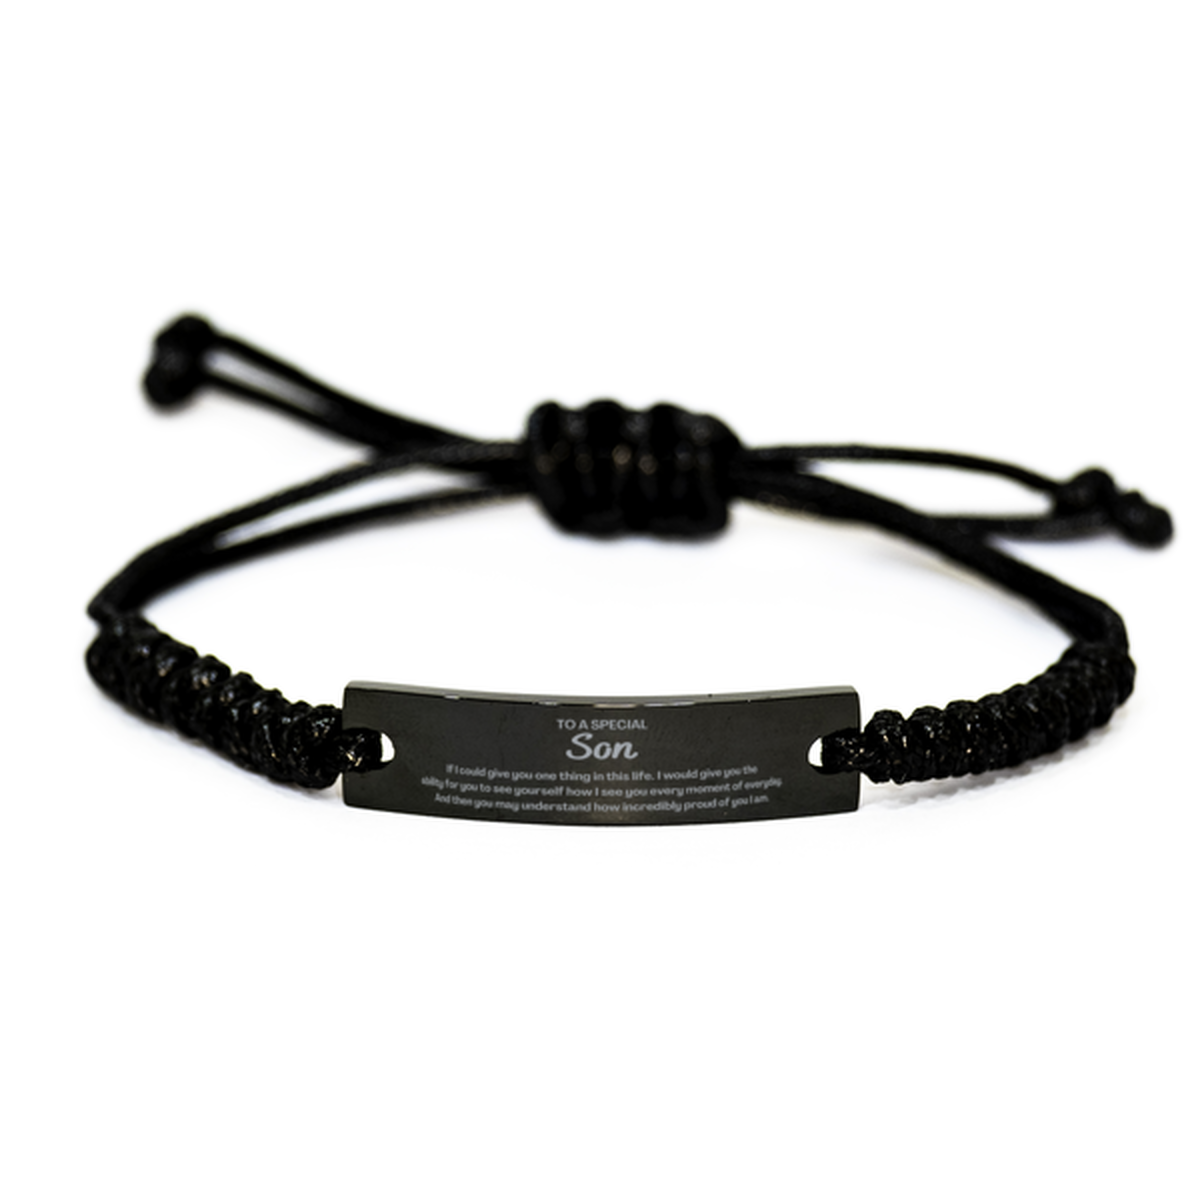 To My Son Black Rope Bracelet, Gifts For Son Engraved, Inspirational Gifts for Christmas Birthday, Epic Gifts for Son To A Special Son how incredibly proud of you I am